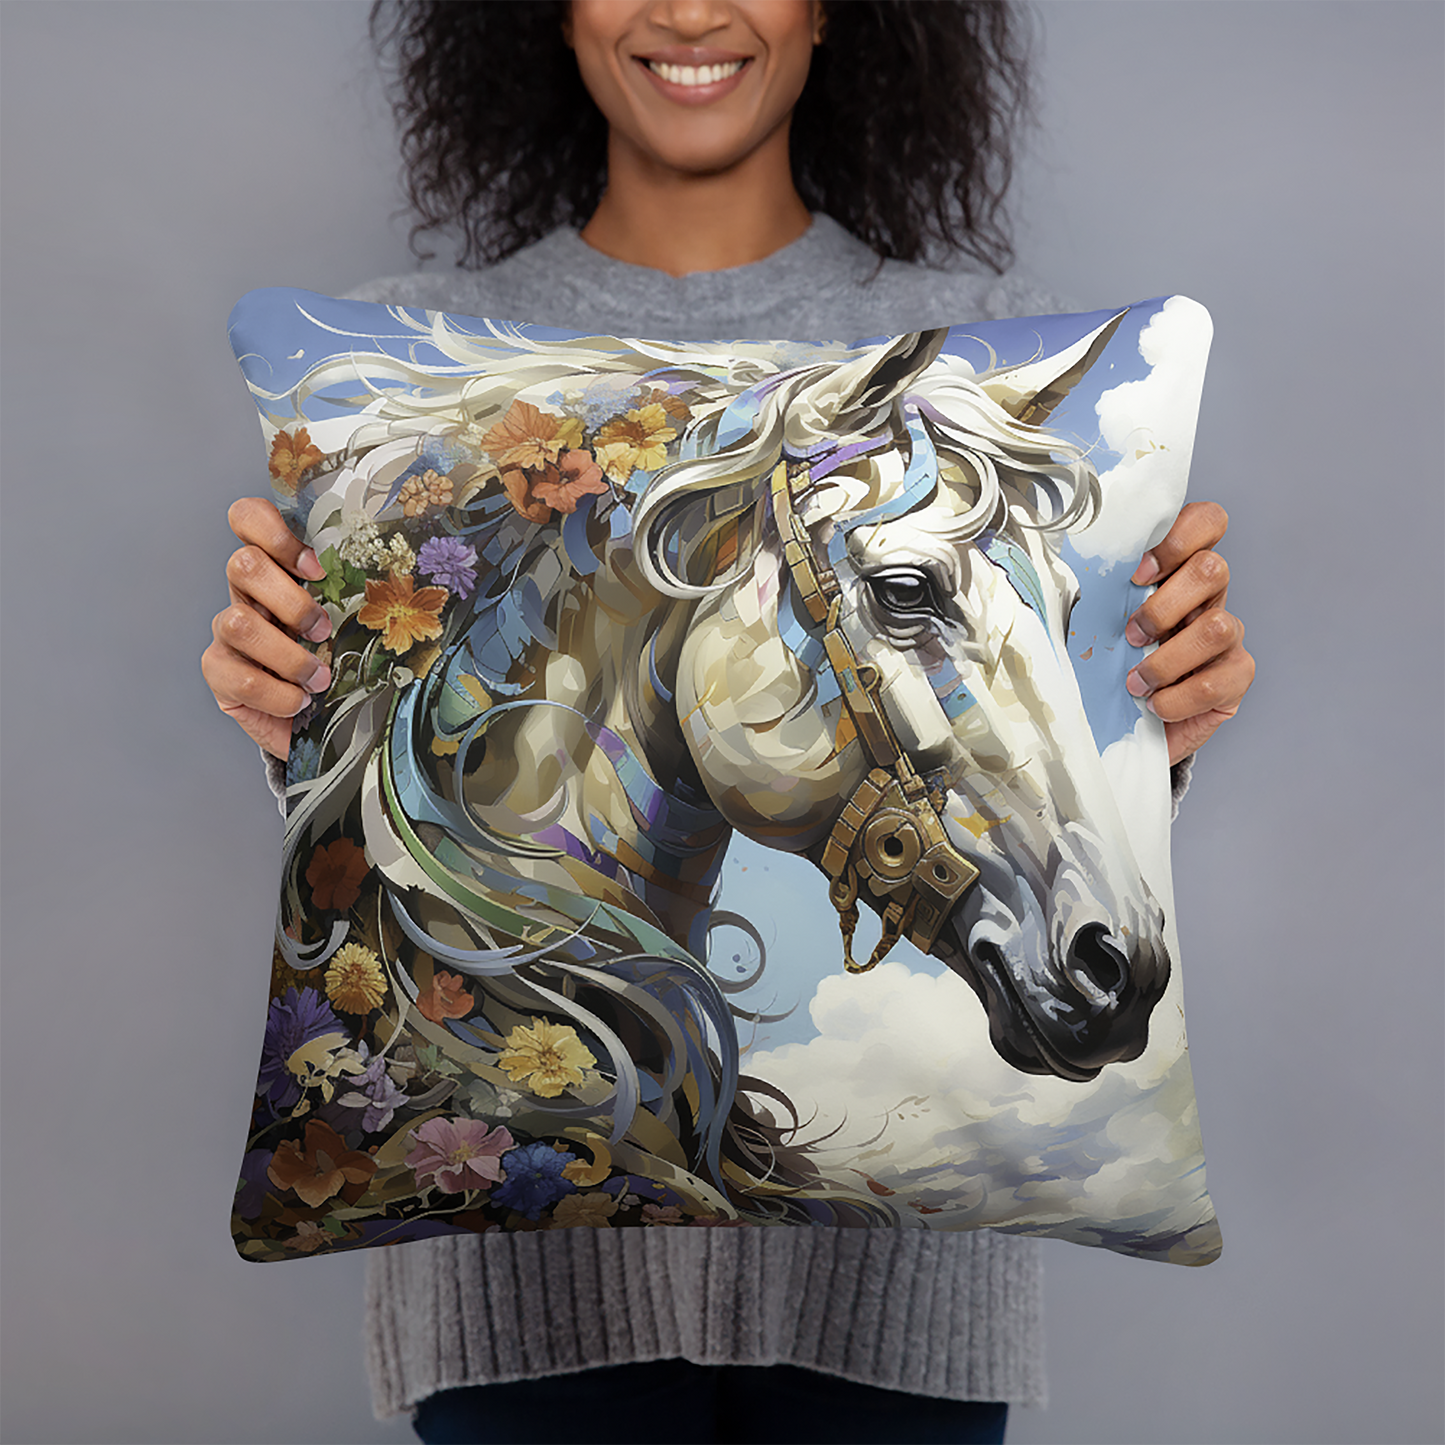 Horse Throw Pillow Fantasy Realism Floral Polyester Decorative Cushion 18x18